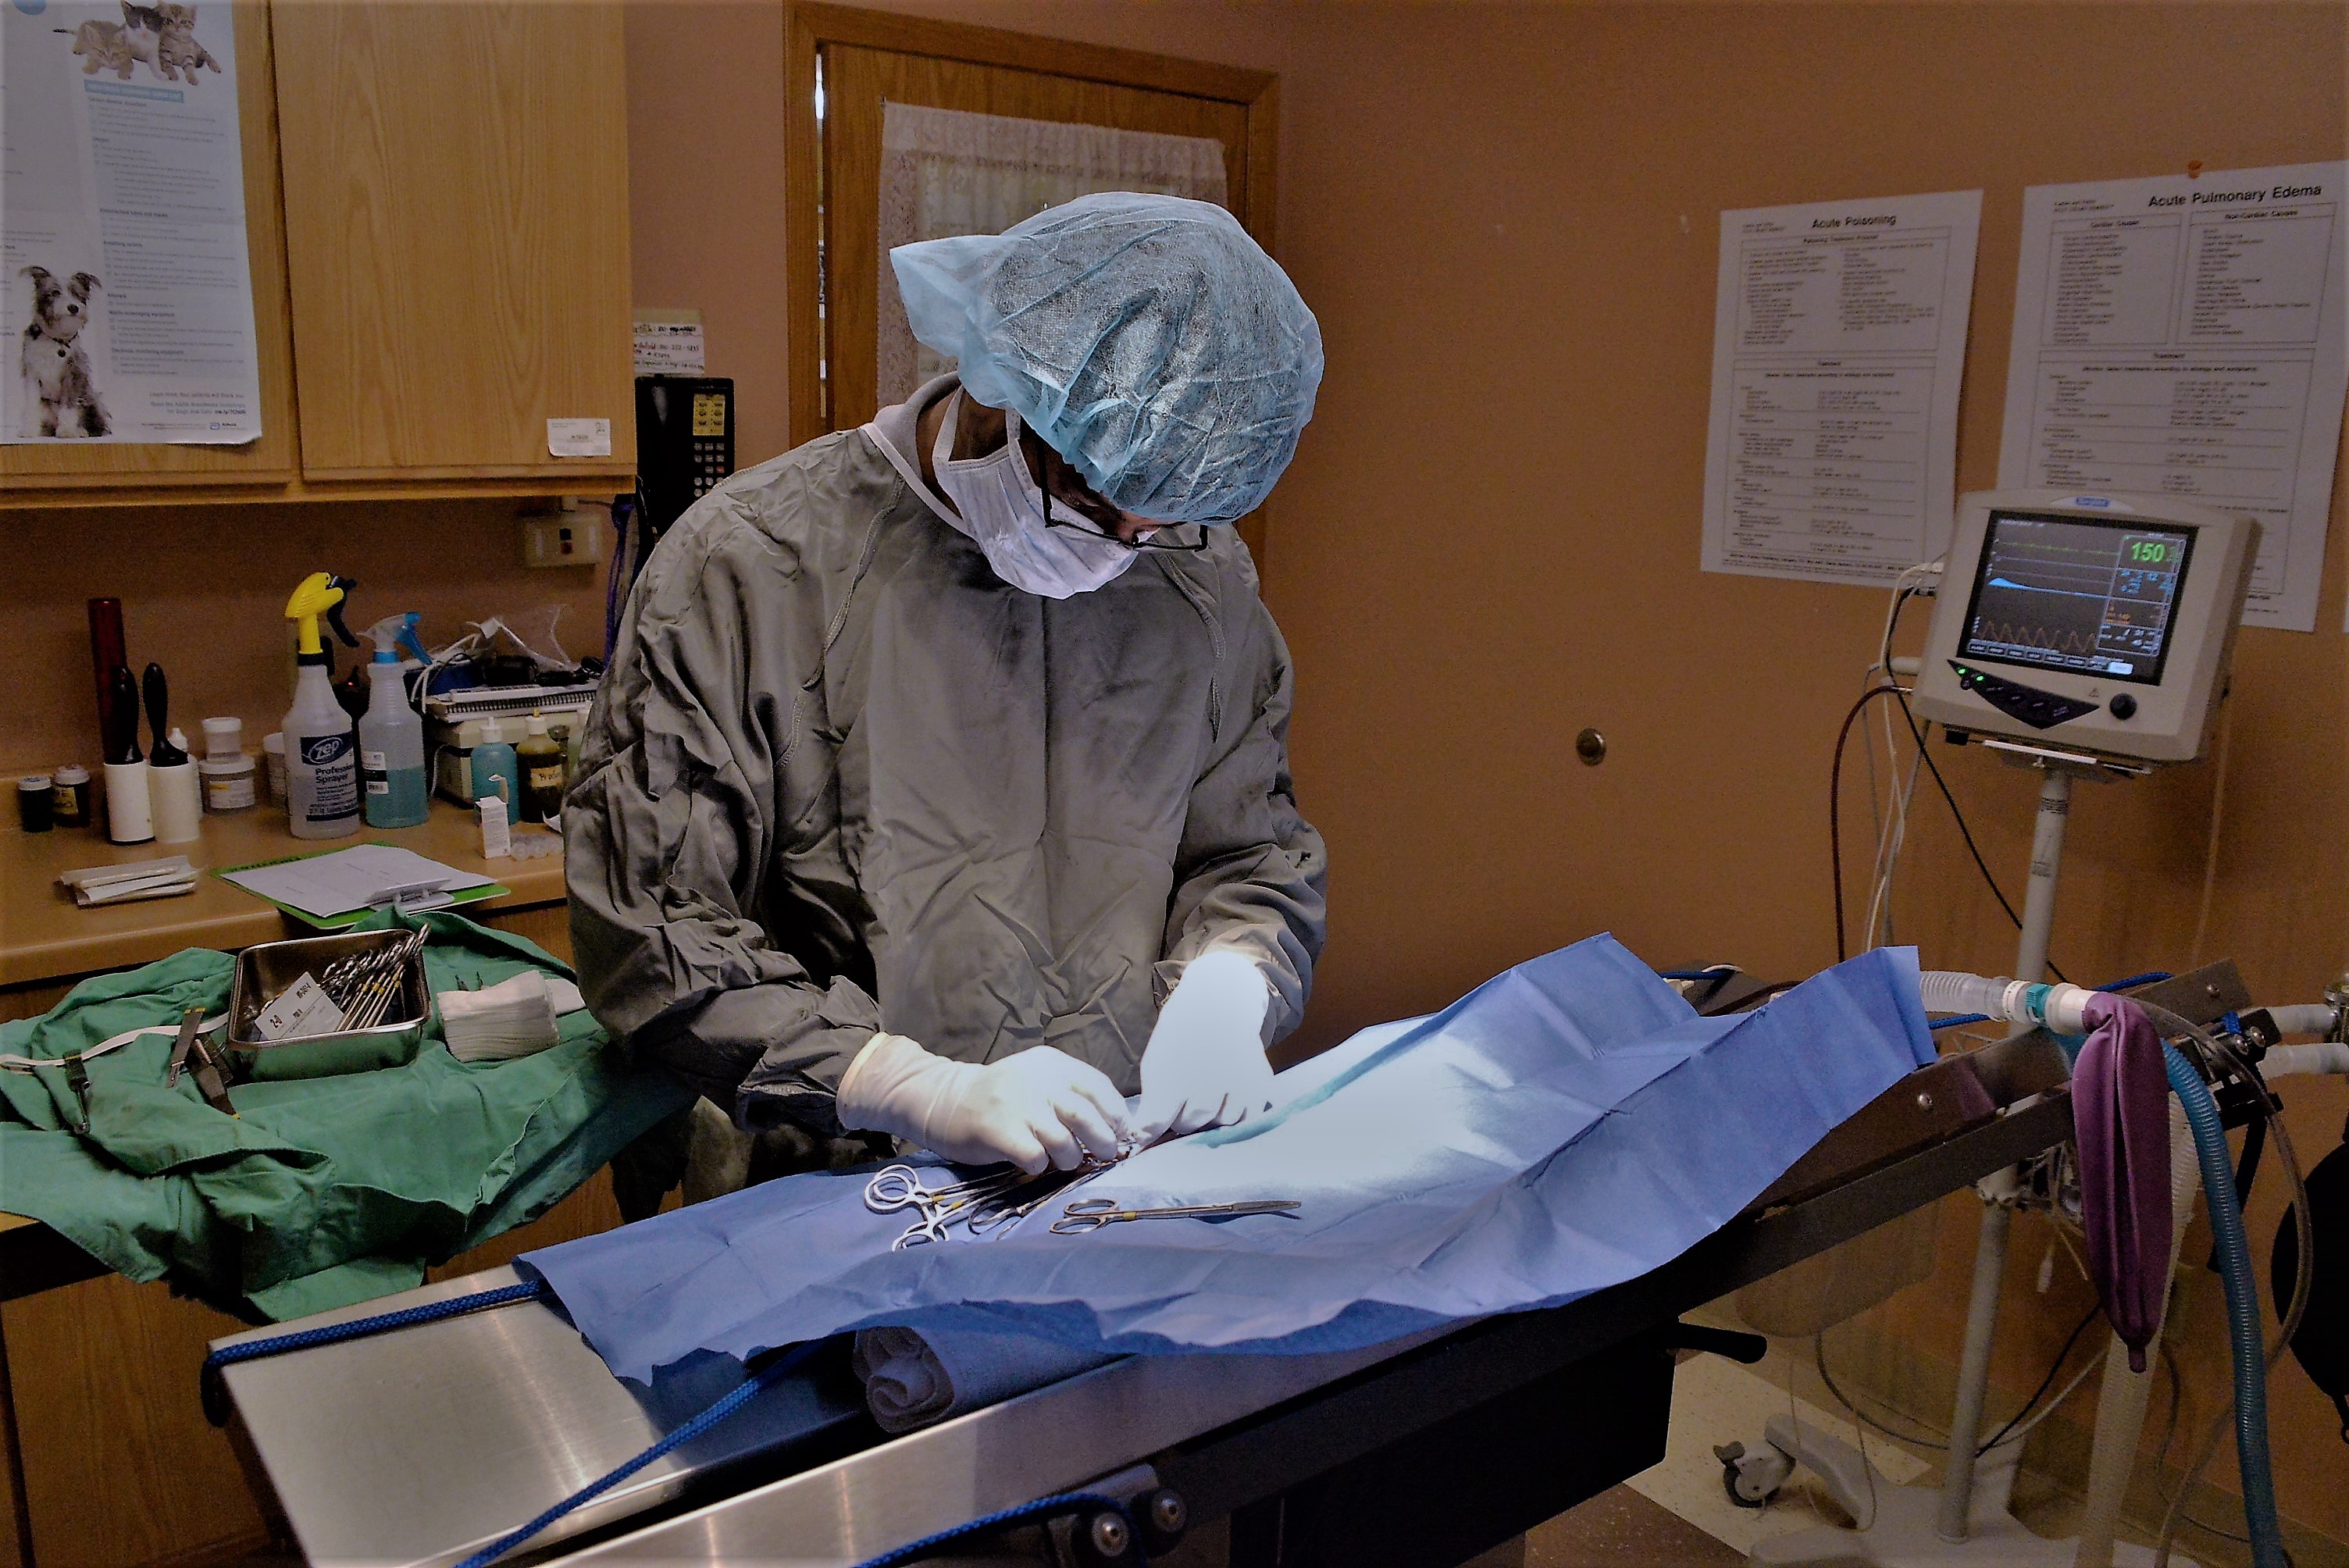 A special surgery suite is used only for surgery.  The heated surgery table and Bair Hugger heating blanket allows patients to retain body heat during anesthesia and aids in a quicker recovery. Our radiowave surgery unit allows us to perform surgery with 